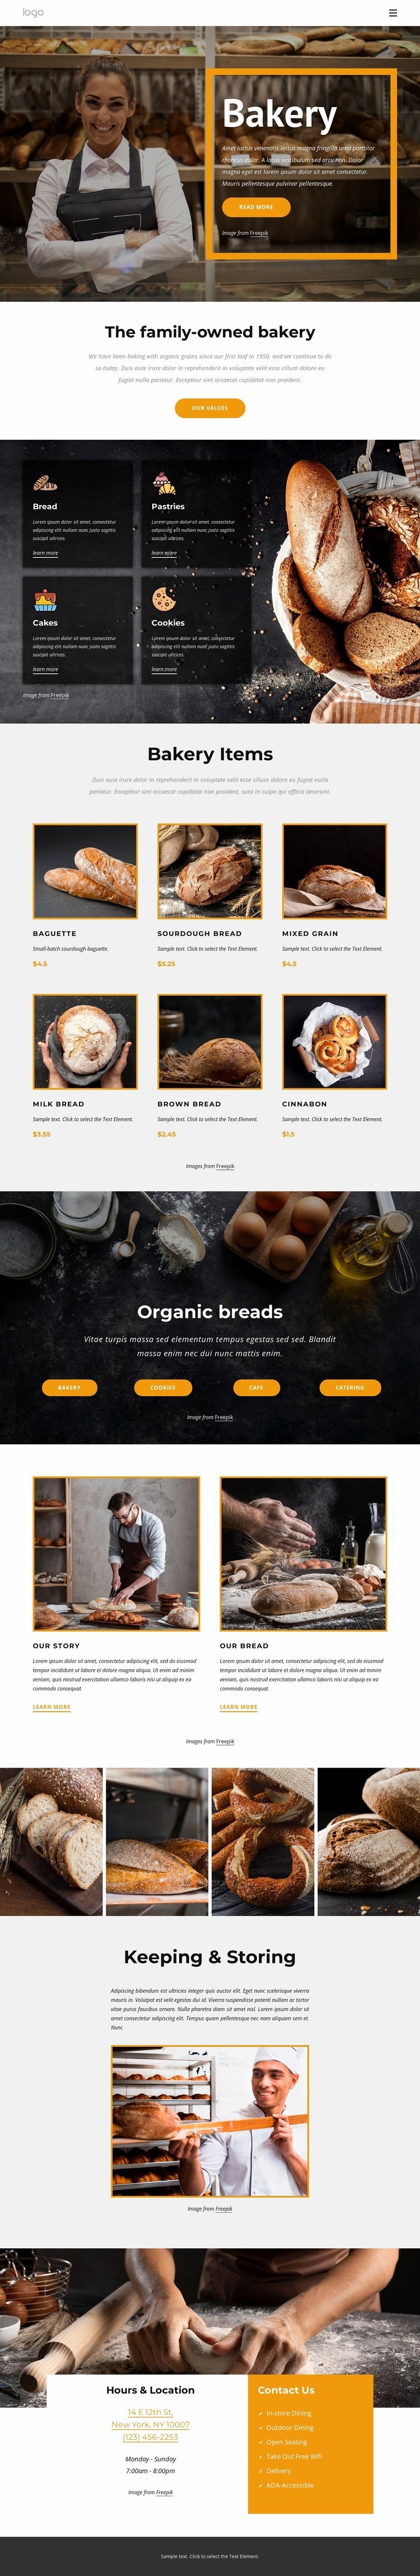 The family-owned bakery Wix Template Alternative